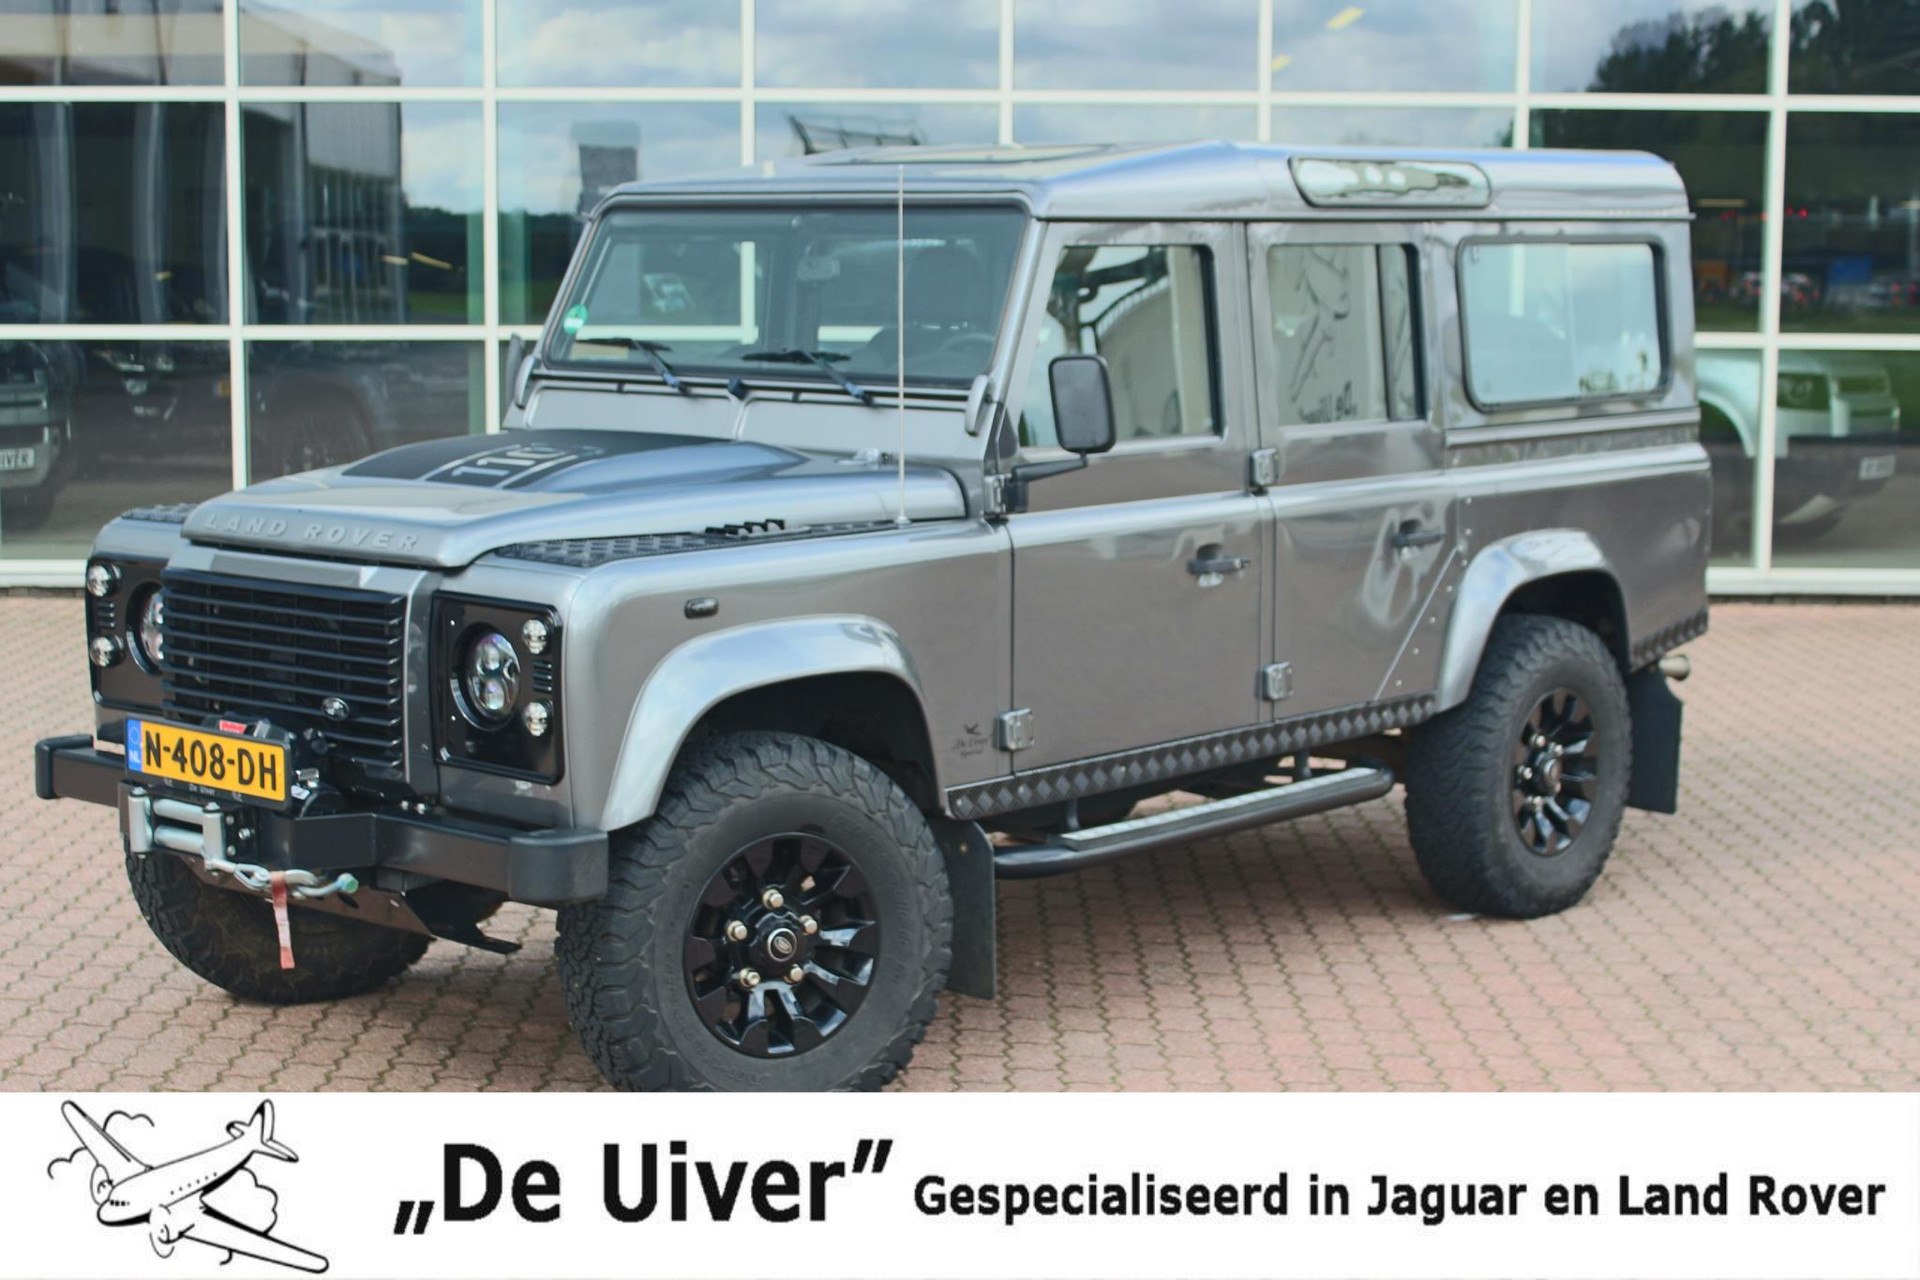 Land Rover Defender 2.4 TD 110 SW XTech „De Uiver" Special 7-Persoons 165 Pk 440 Nm + Cruise Control bij viaBOVAG.nl